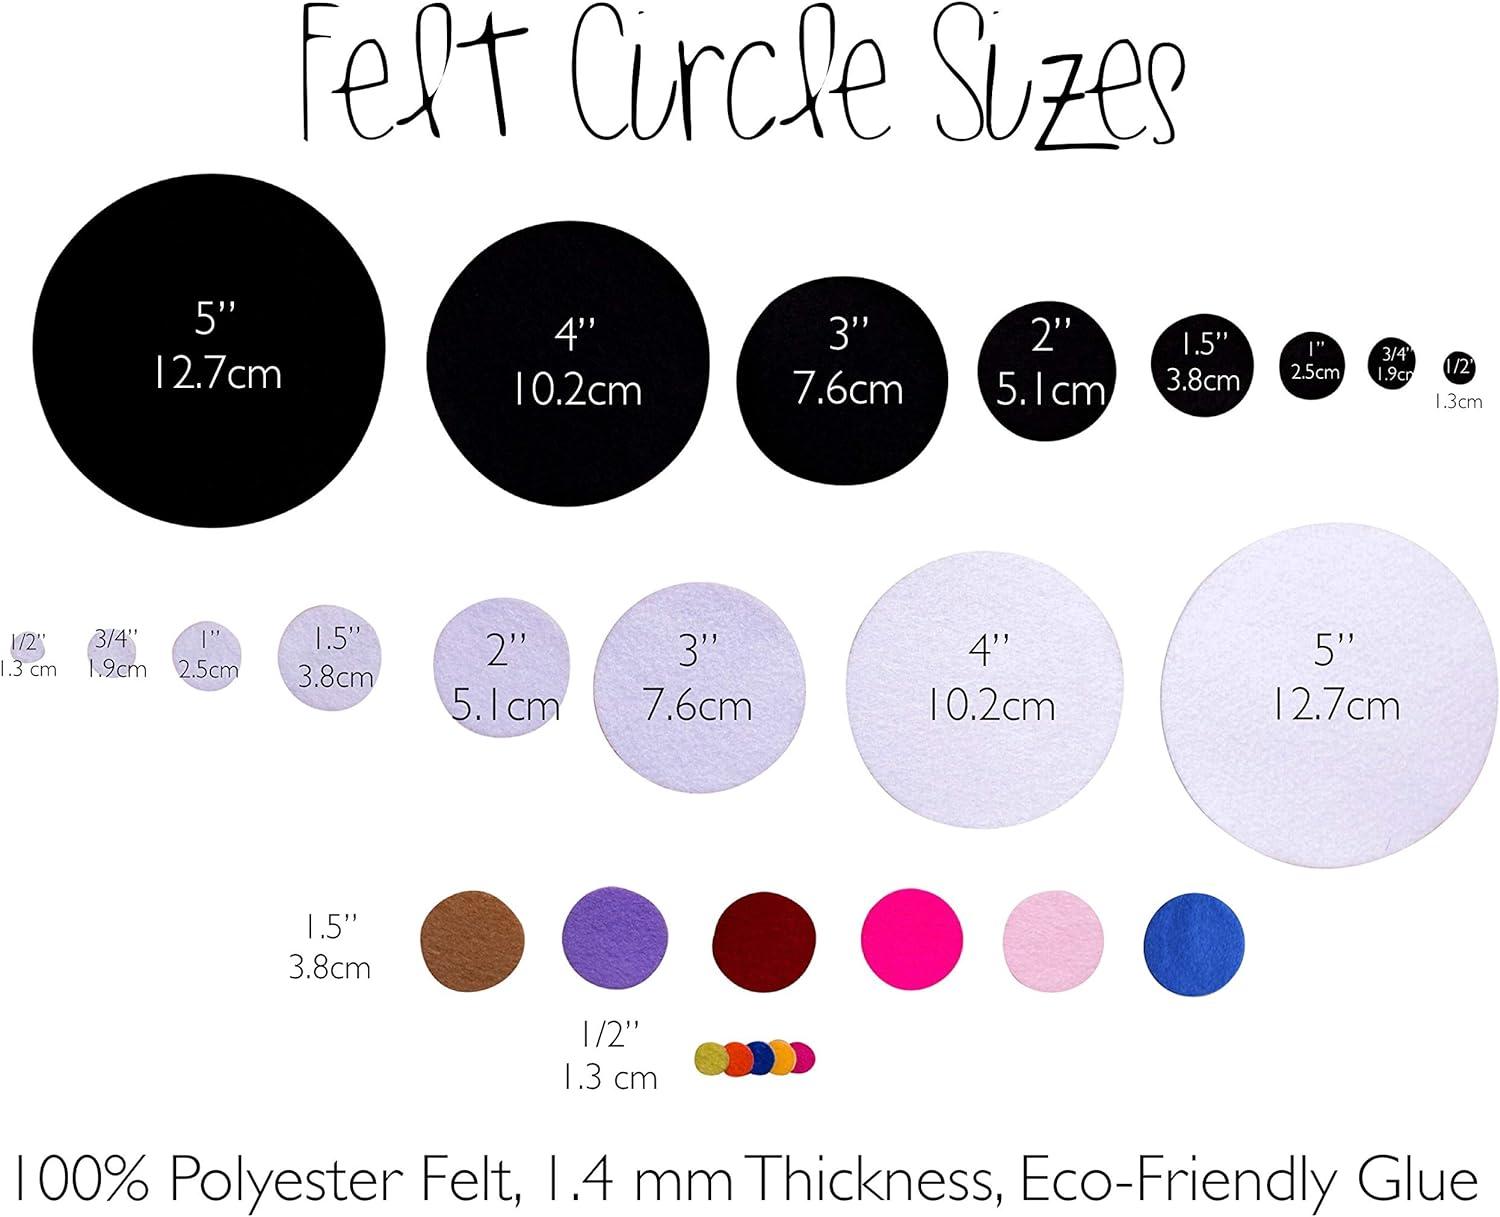 How to cut out circles from felt the easy way! 